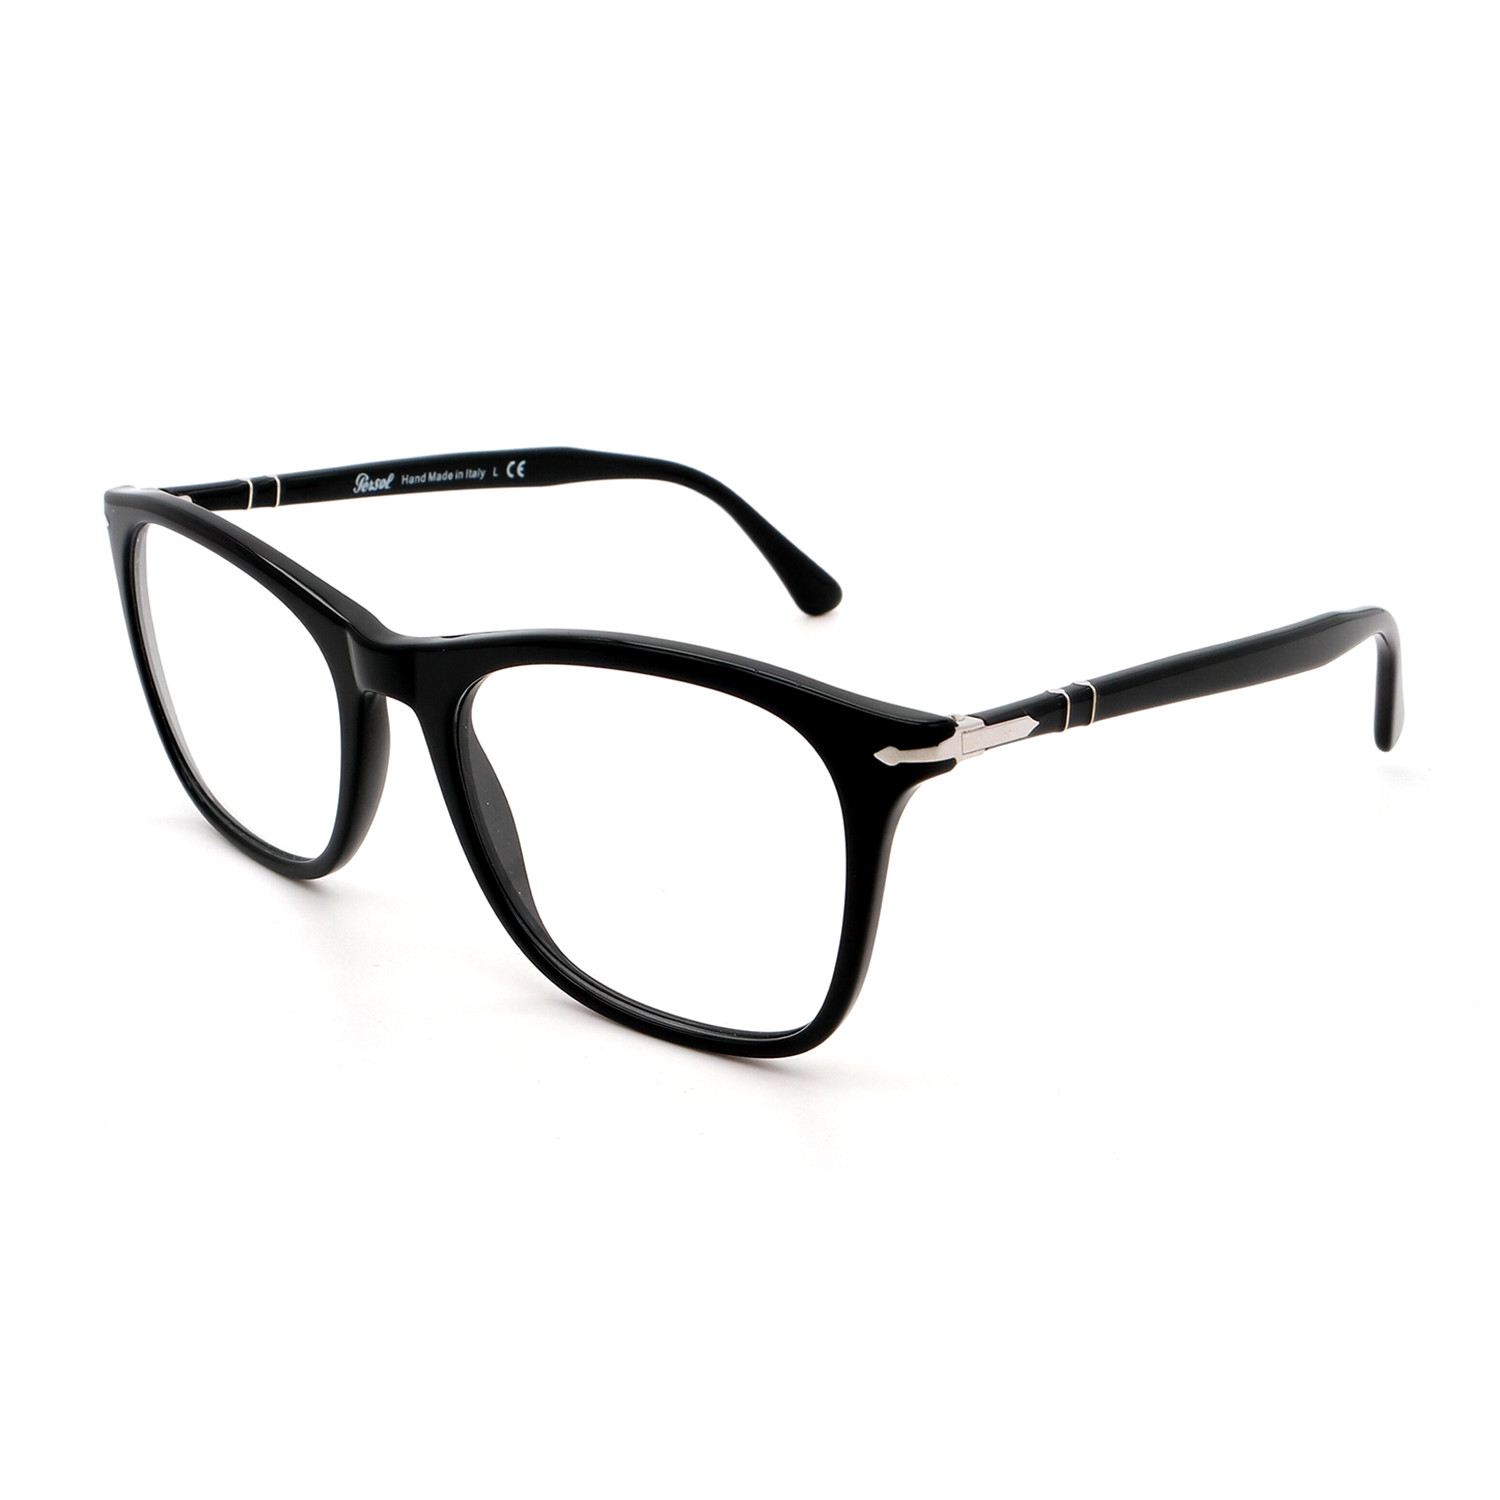 Men's Square Optical Frames II // Black - Persol - Touch of Modern